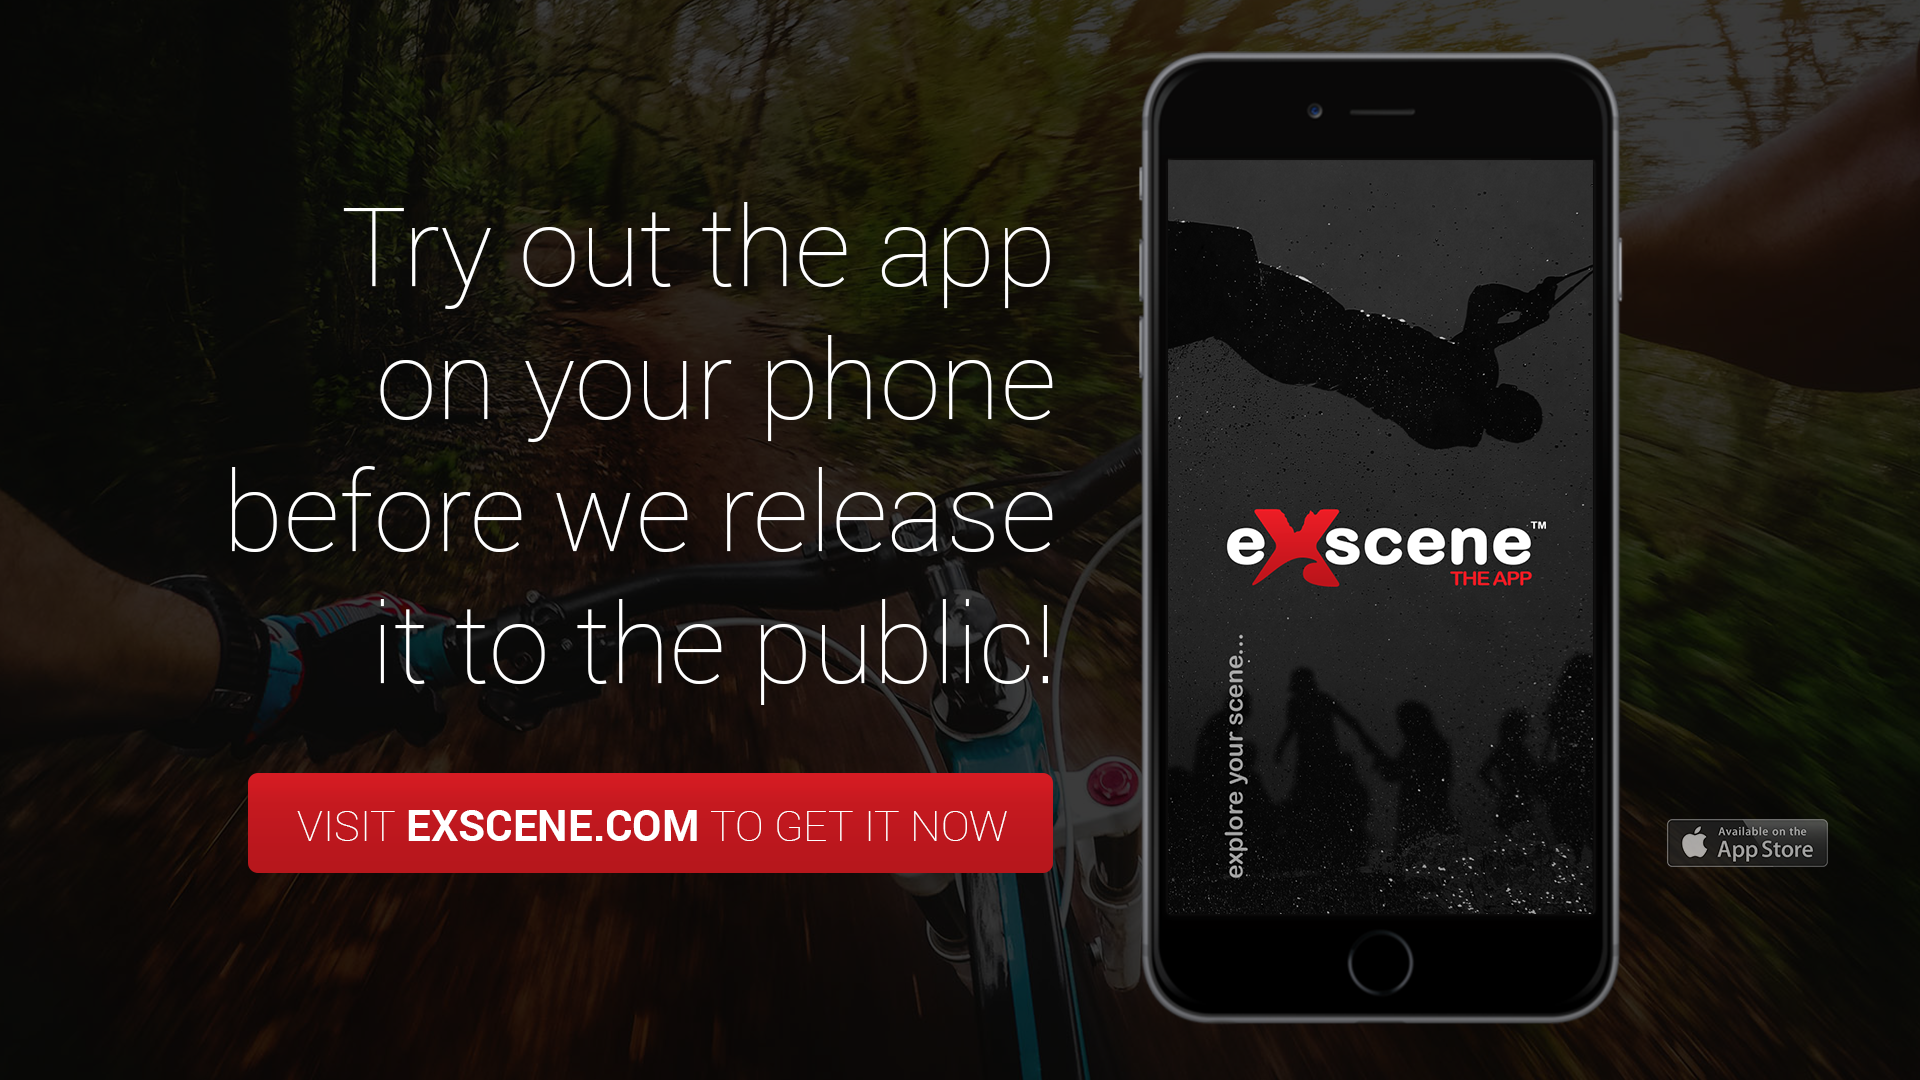 exscene are offering the community a chance to try the app before it is released to the public